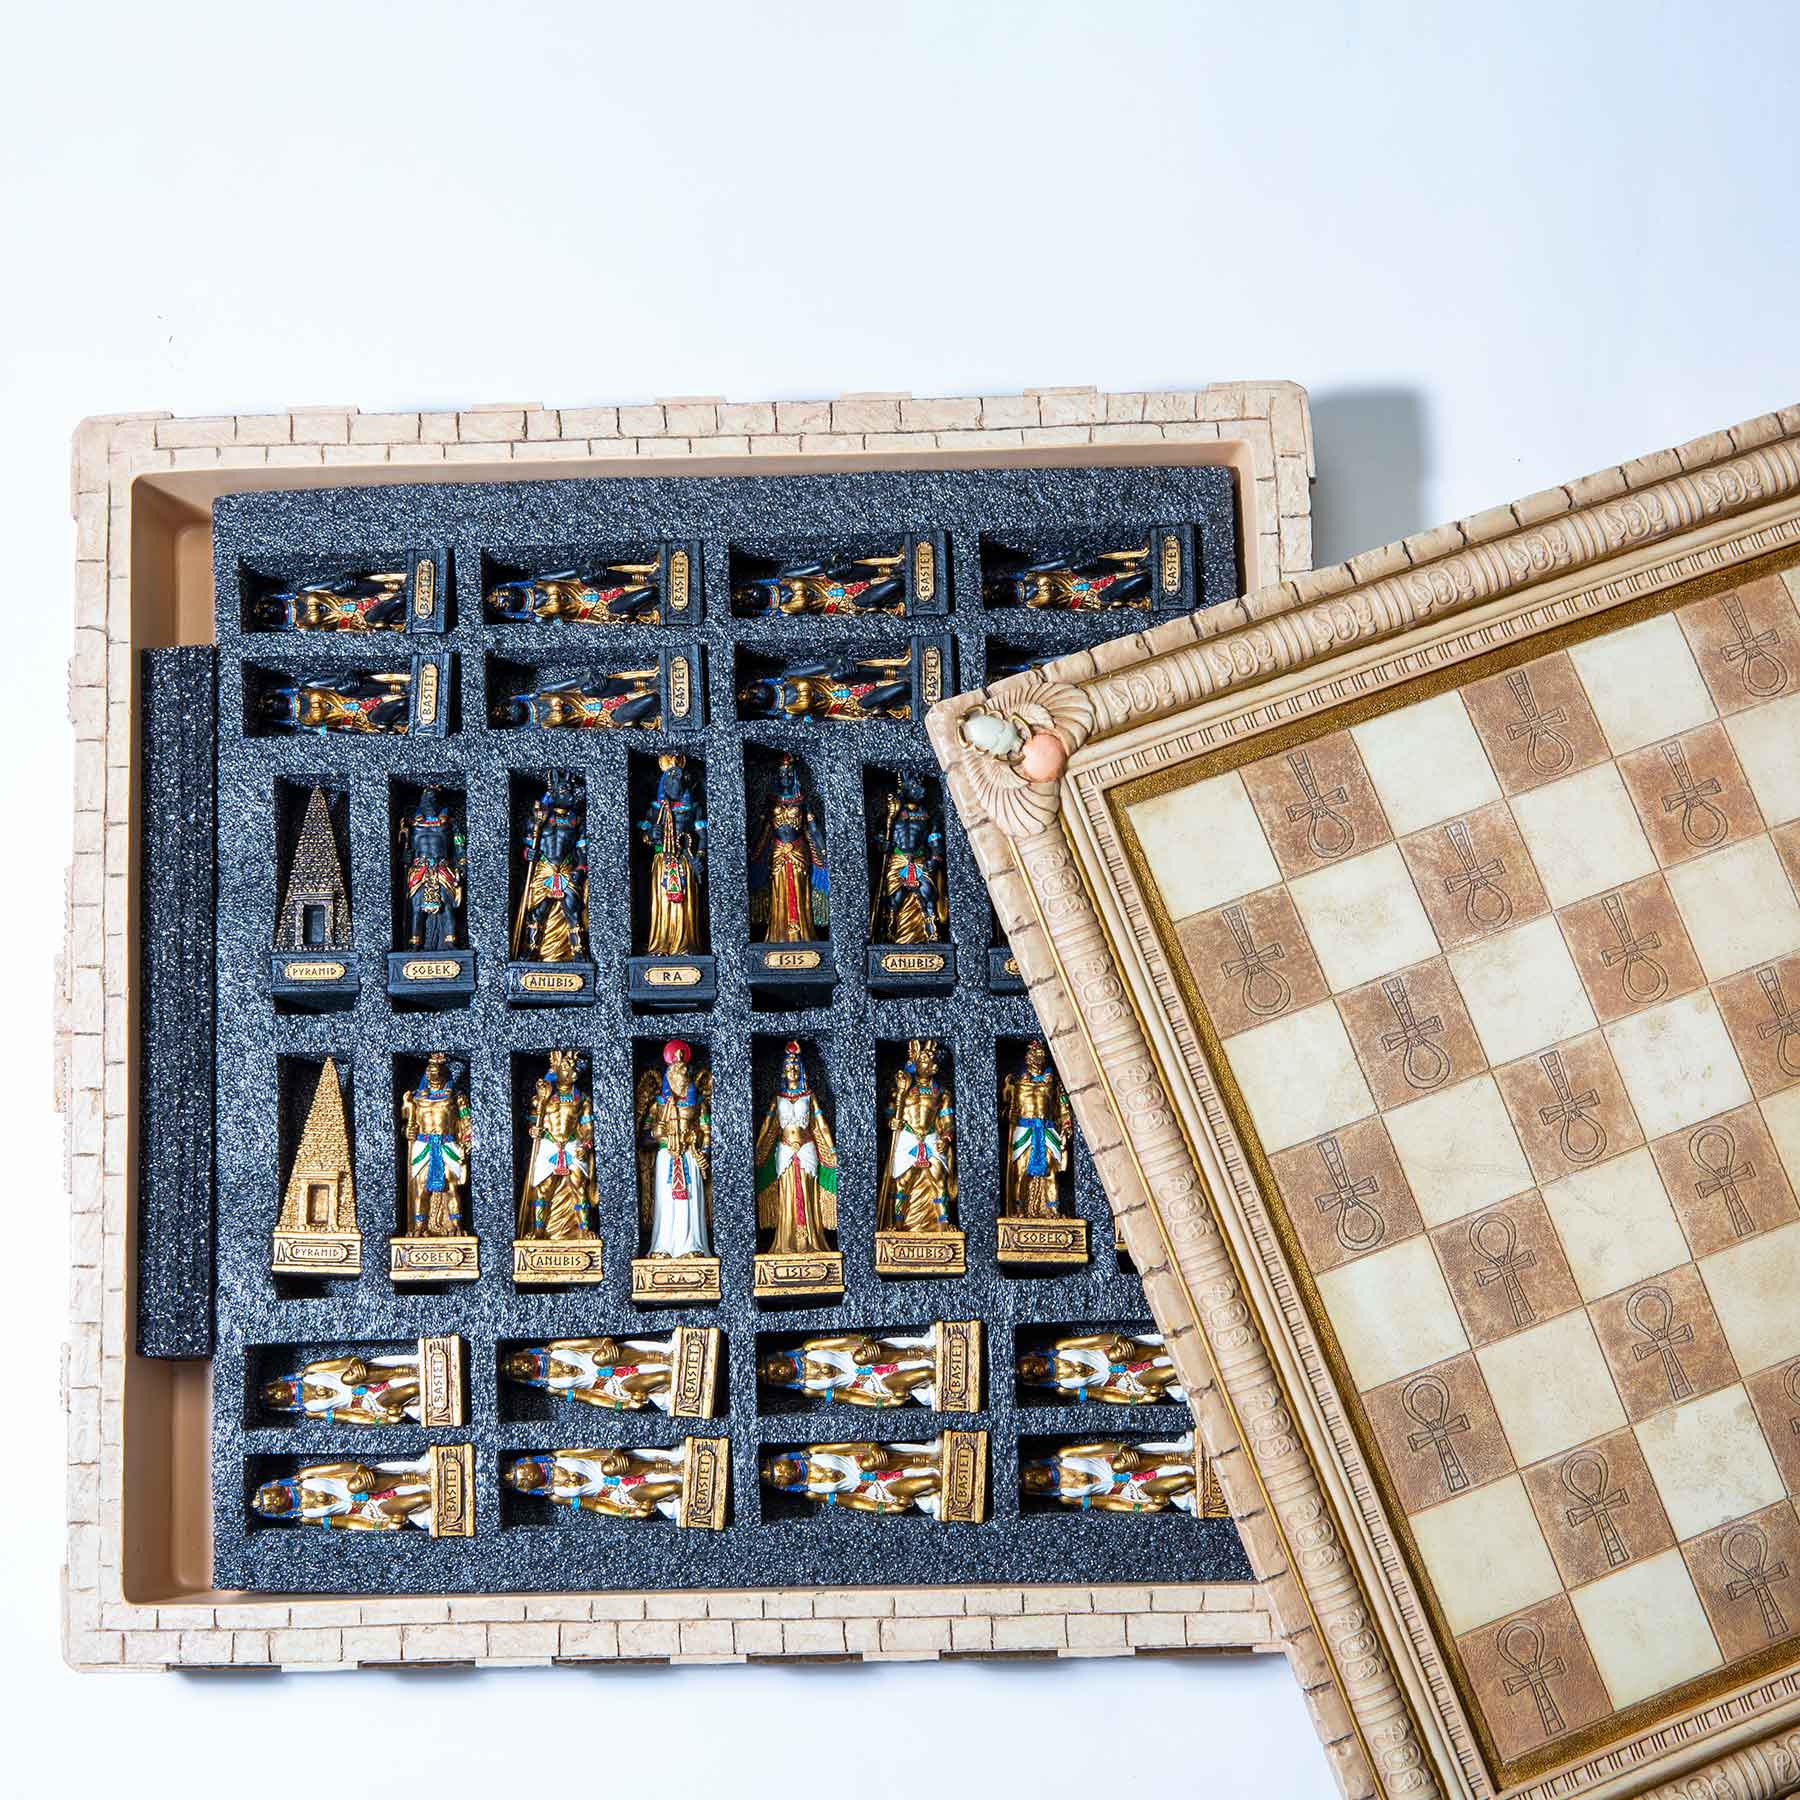 Custom Made Egyptian Goods Home Game Chess Set With Ankh Battlefield Board  Gift